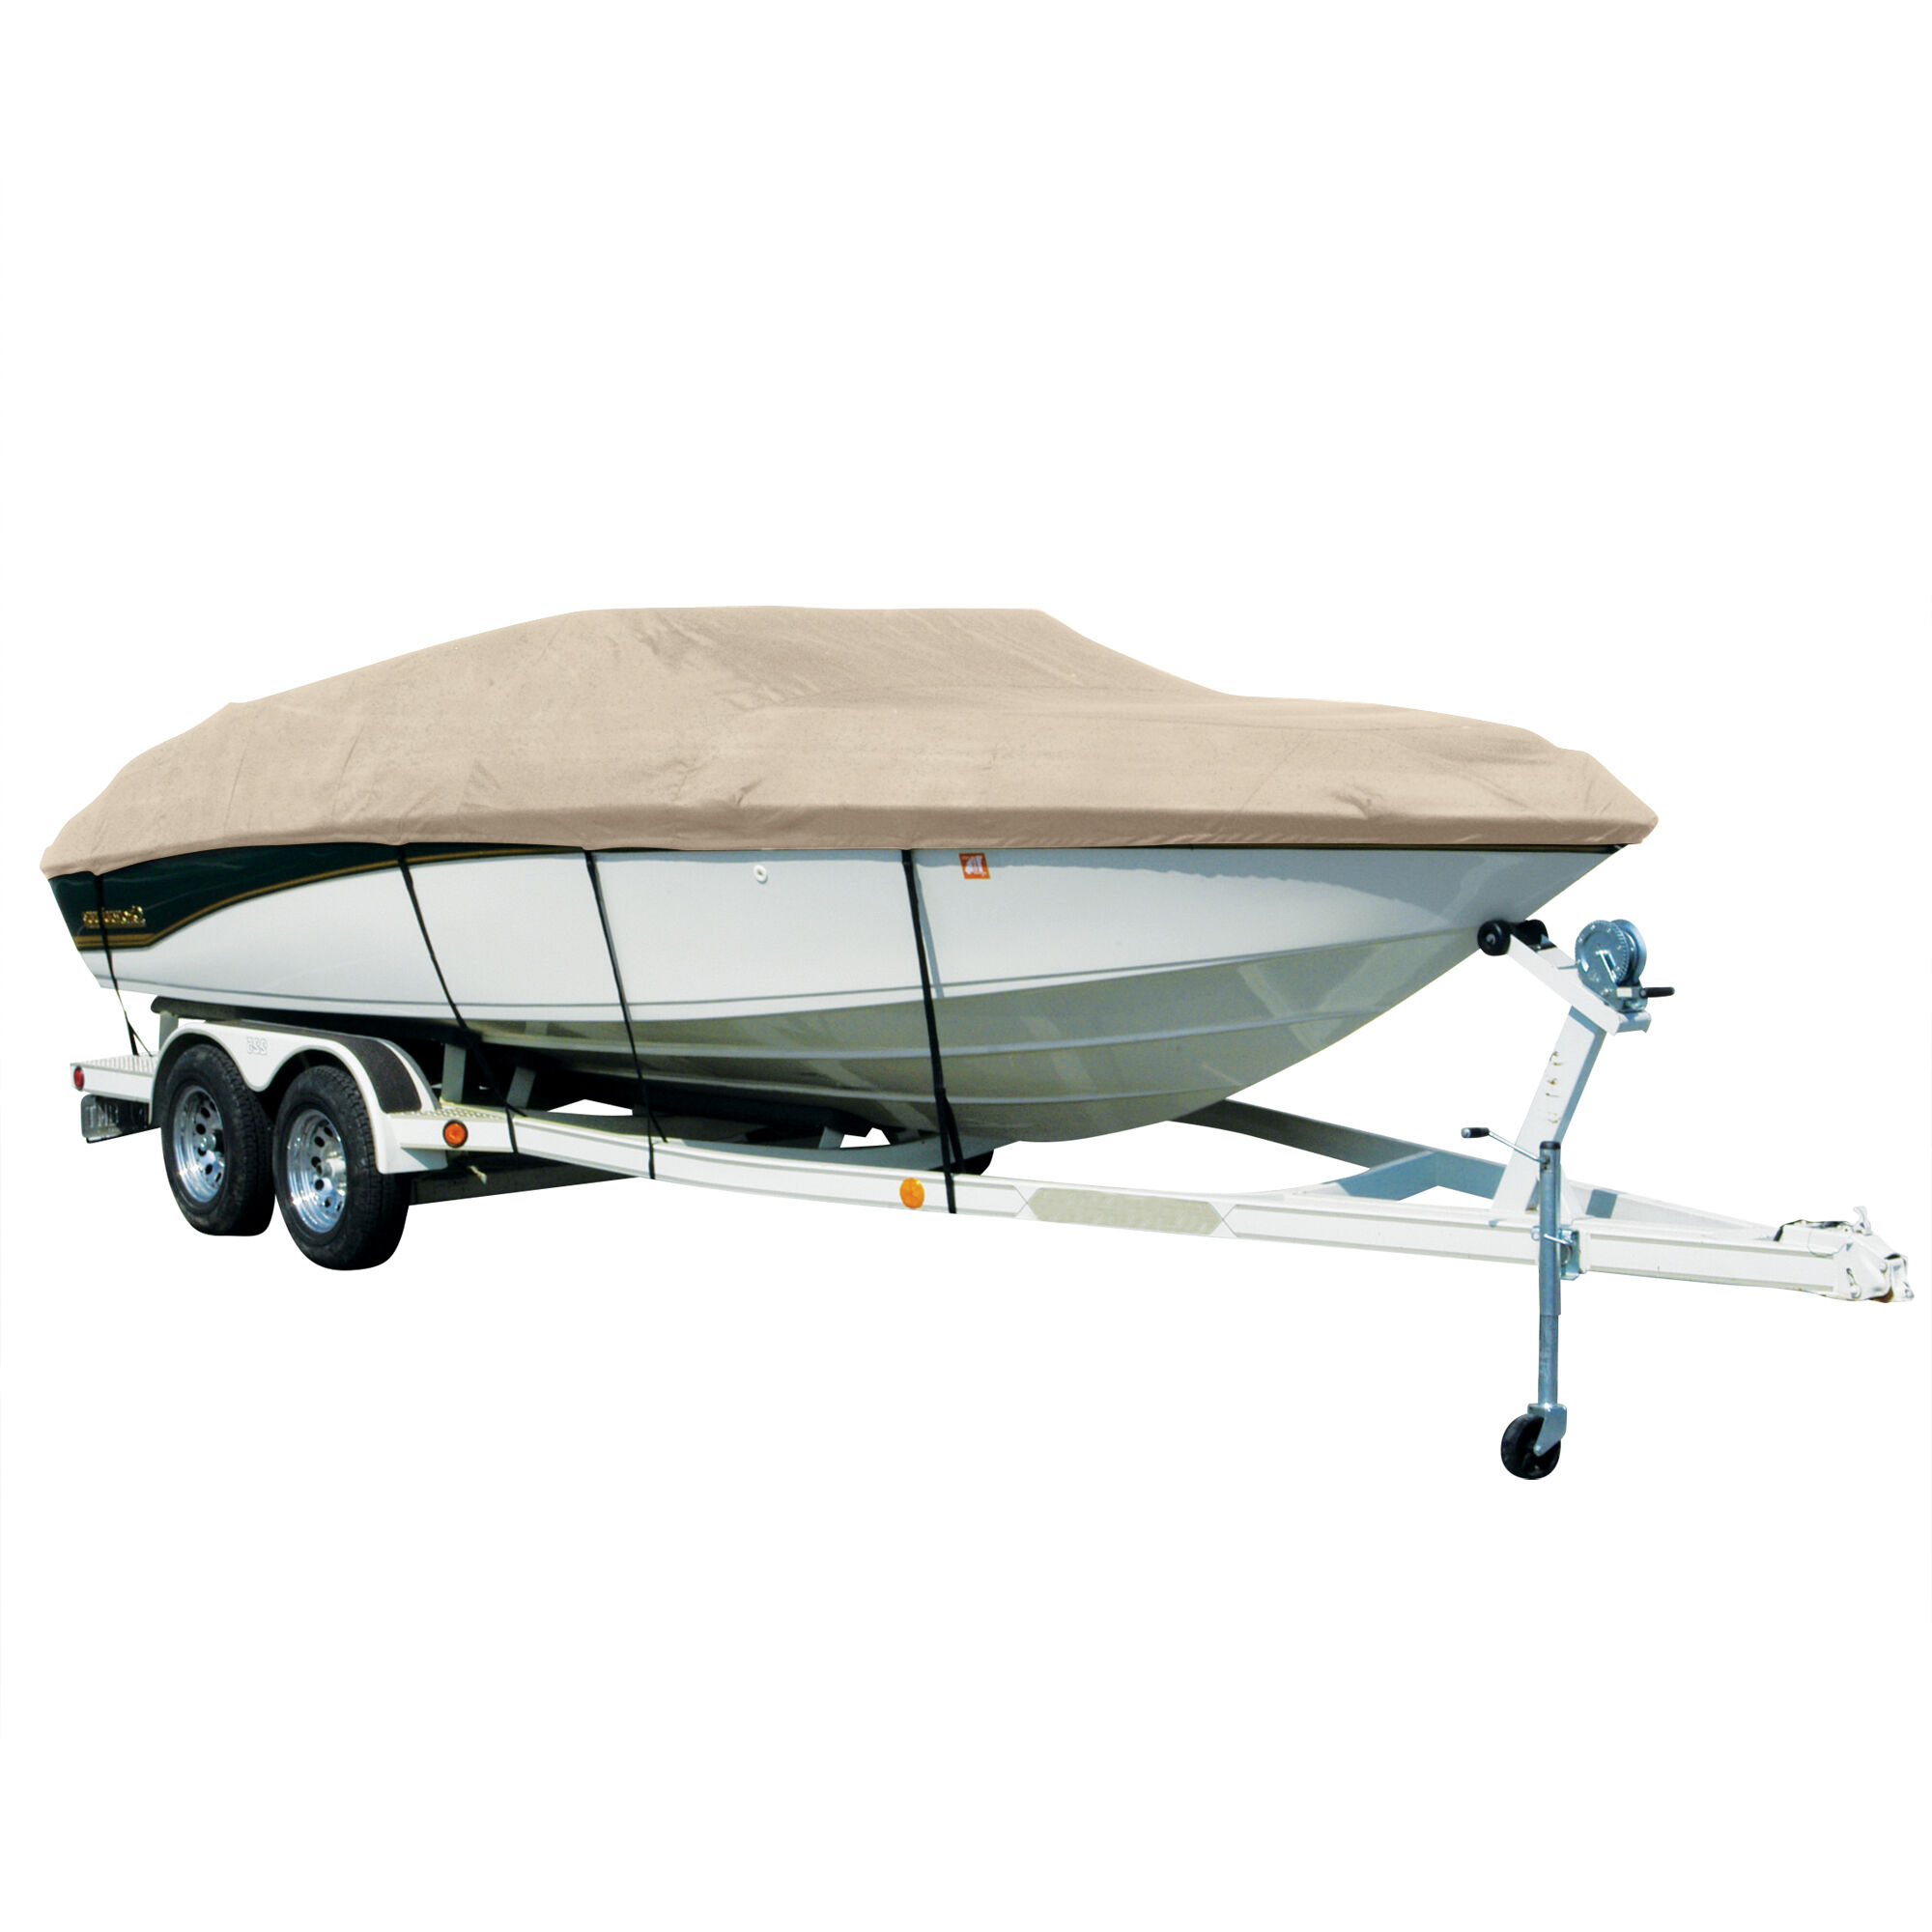 Covermate Exact Fit Sharkskin Boat Cover For SEA RAY 210 SUNDECK w/ ADD ON SWIM PLATFORMM DOES NOT COVER PLATFORMM in Linen